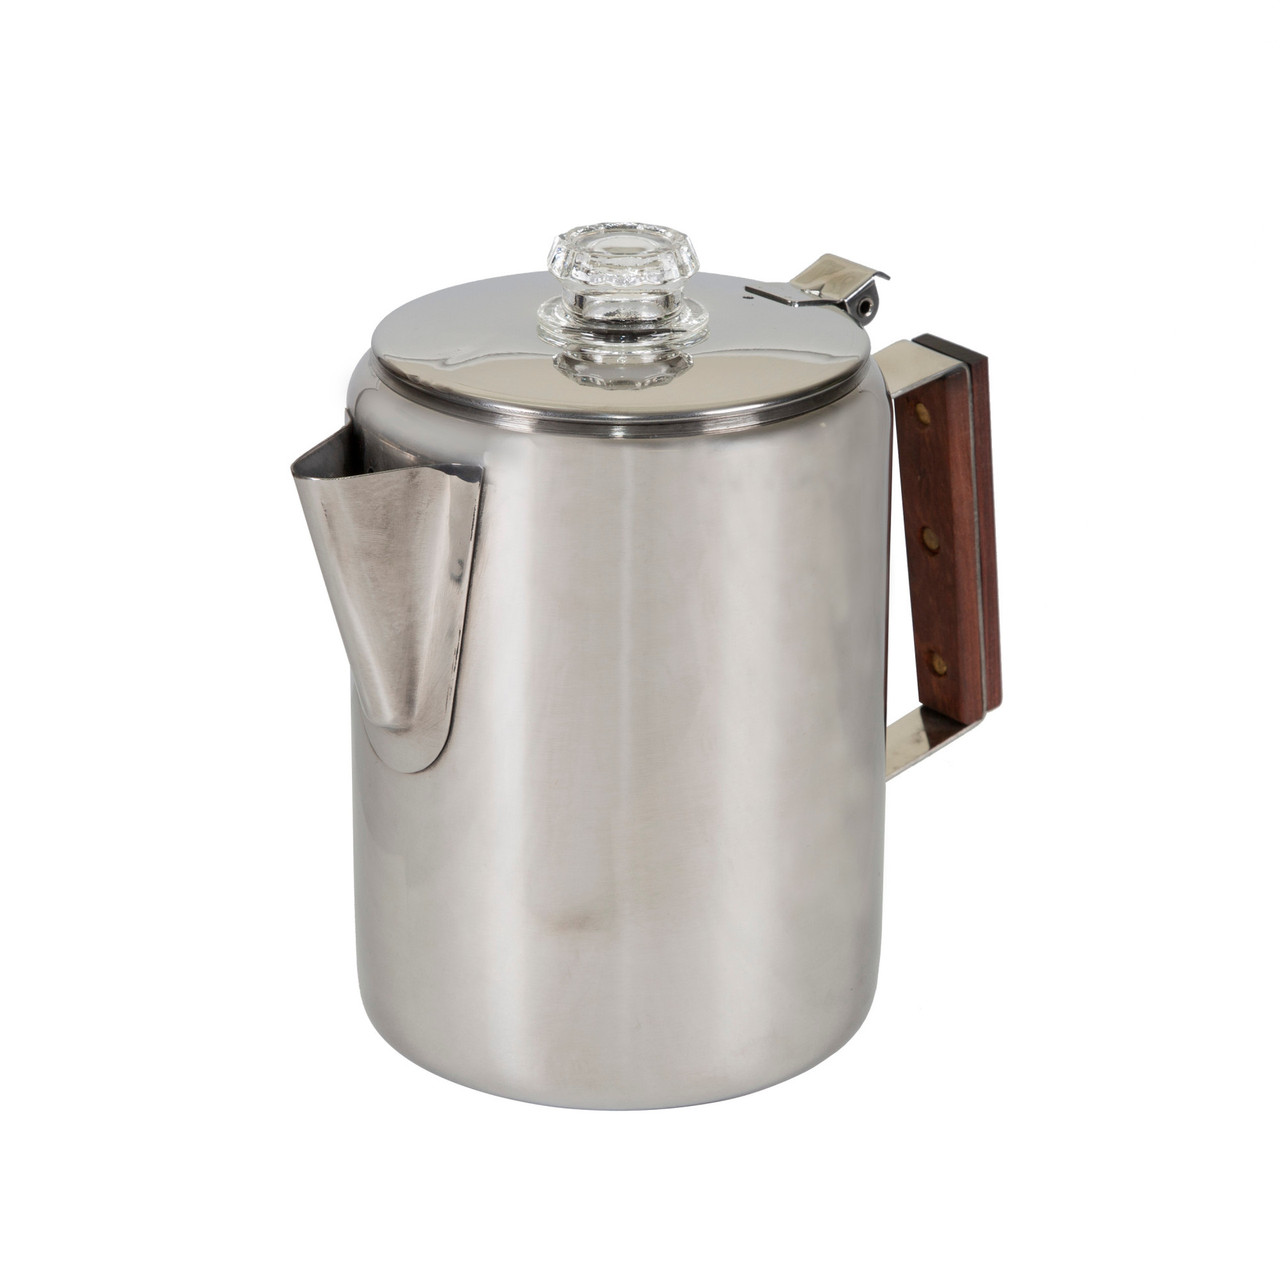 Stansport Stainless Steel Percolator Coffee Pot 9 Cups